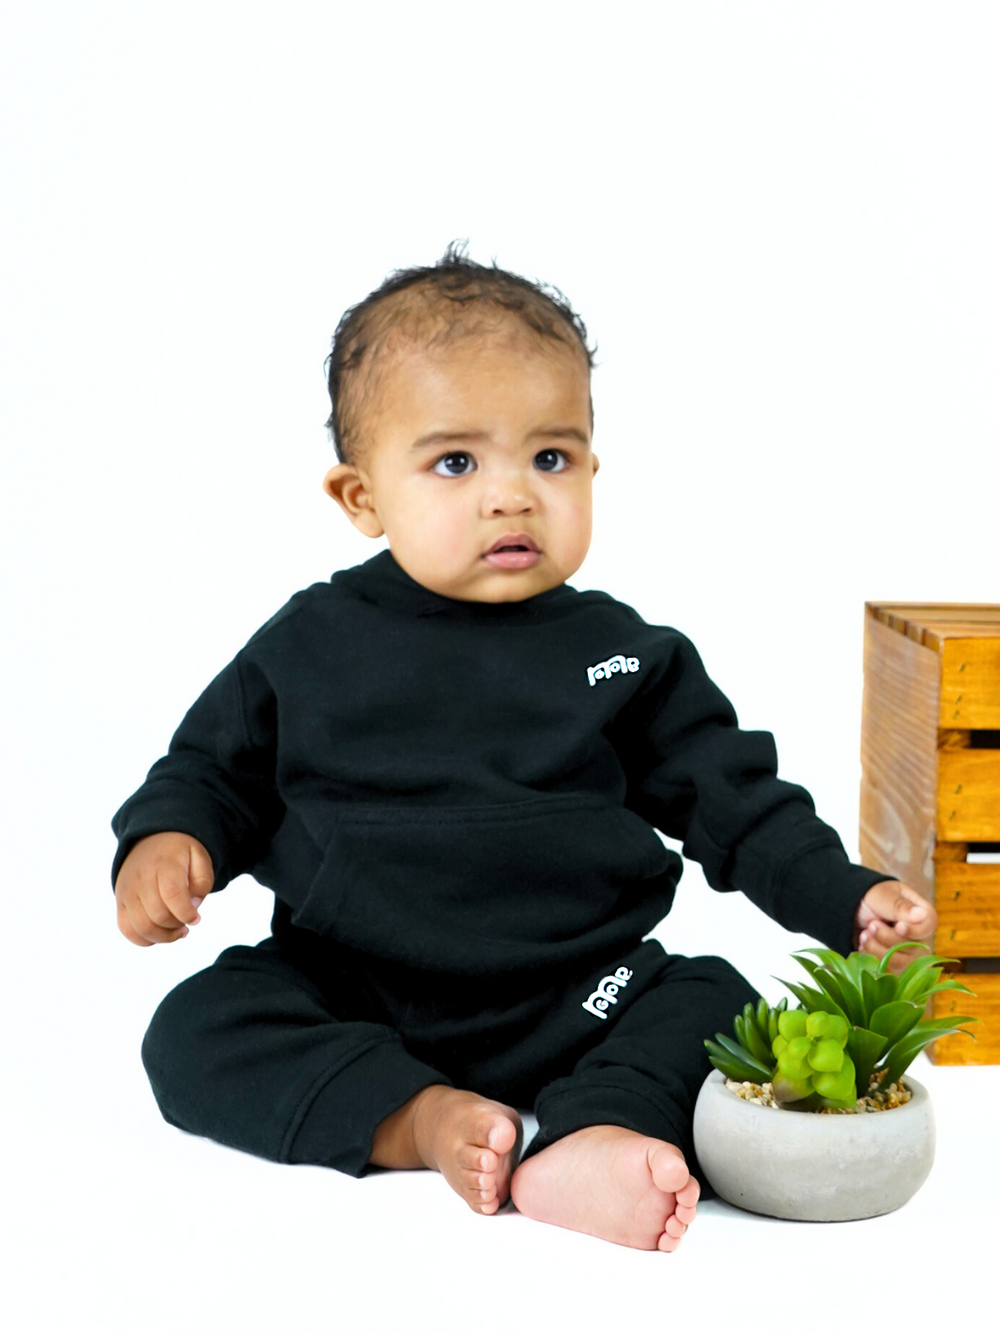 Toddler Black Pullover with raglan sleeves and White GODinme logo at left chest